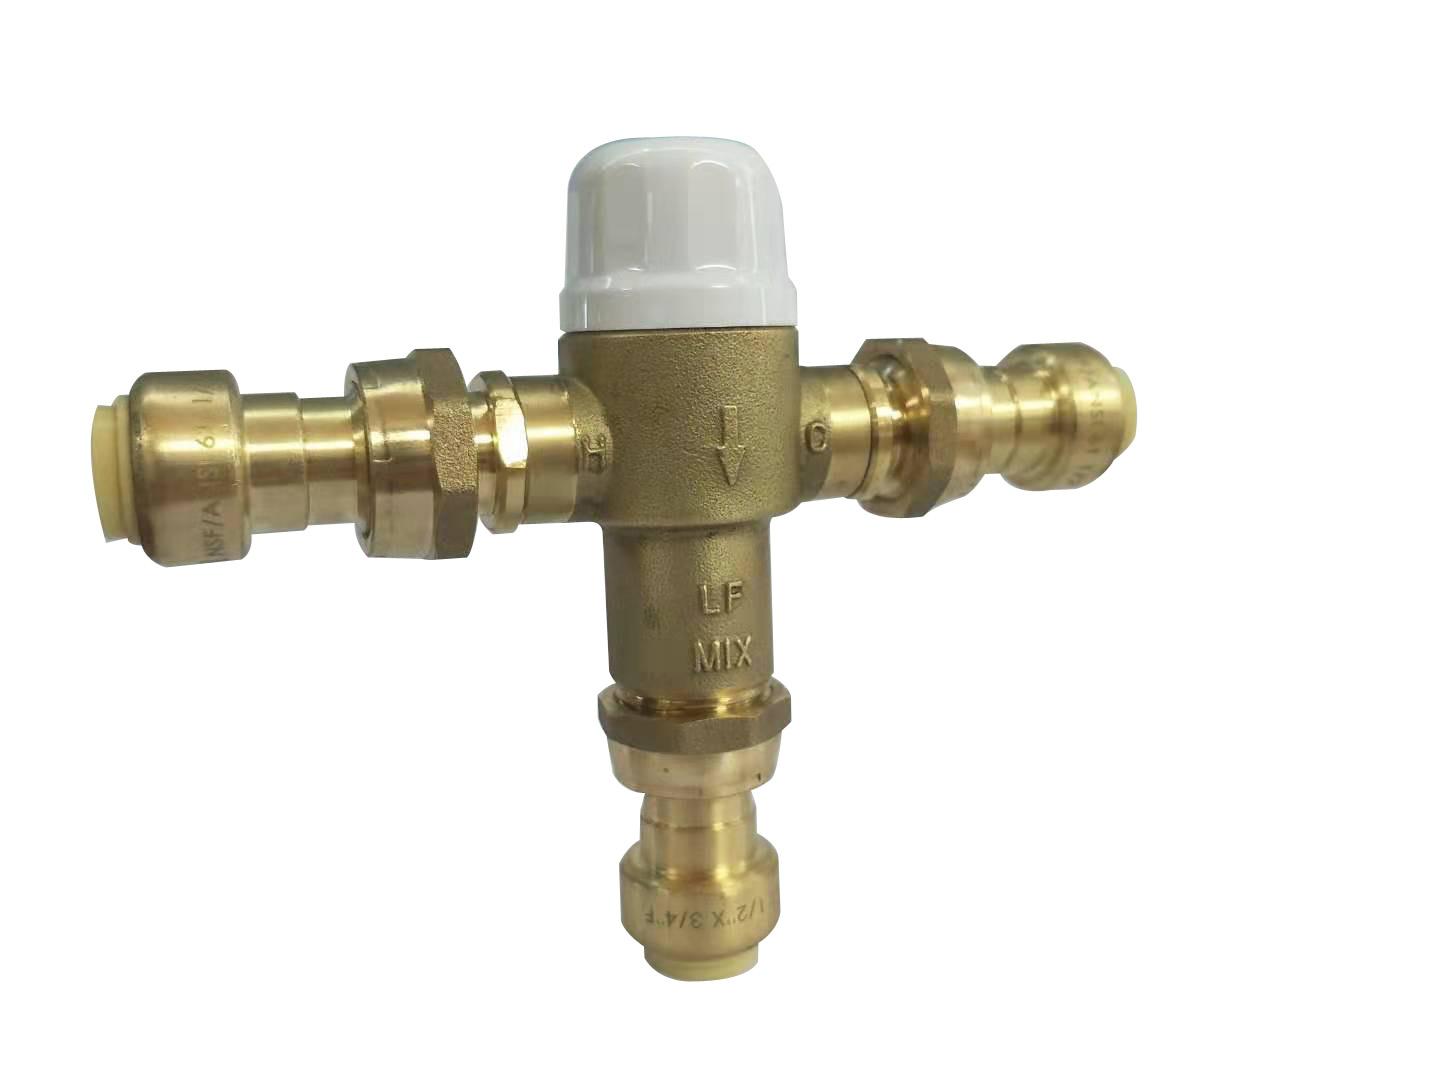 Thermostatic Mixing Valve W39-N1351 Push-Fit 1/2